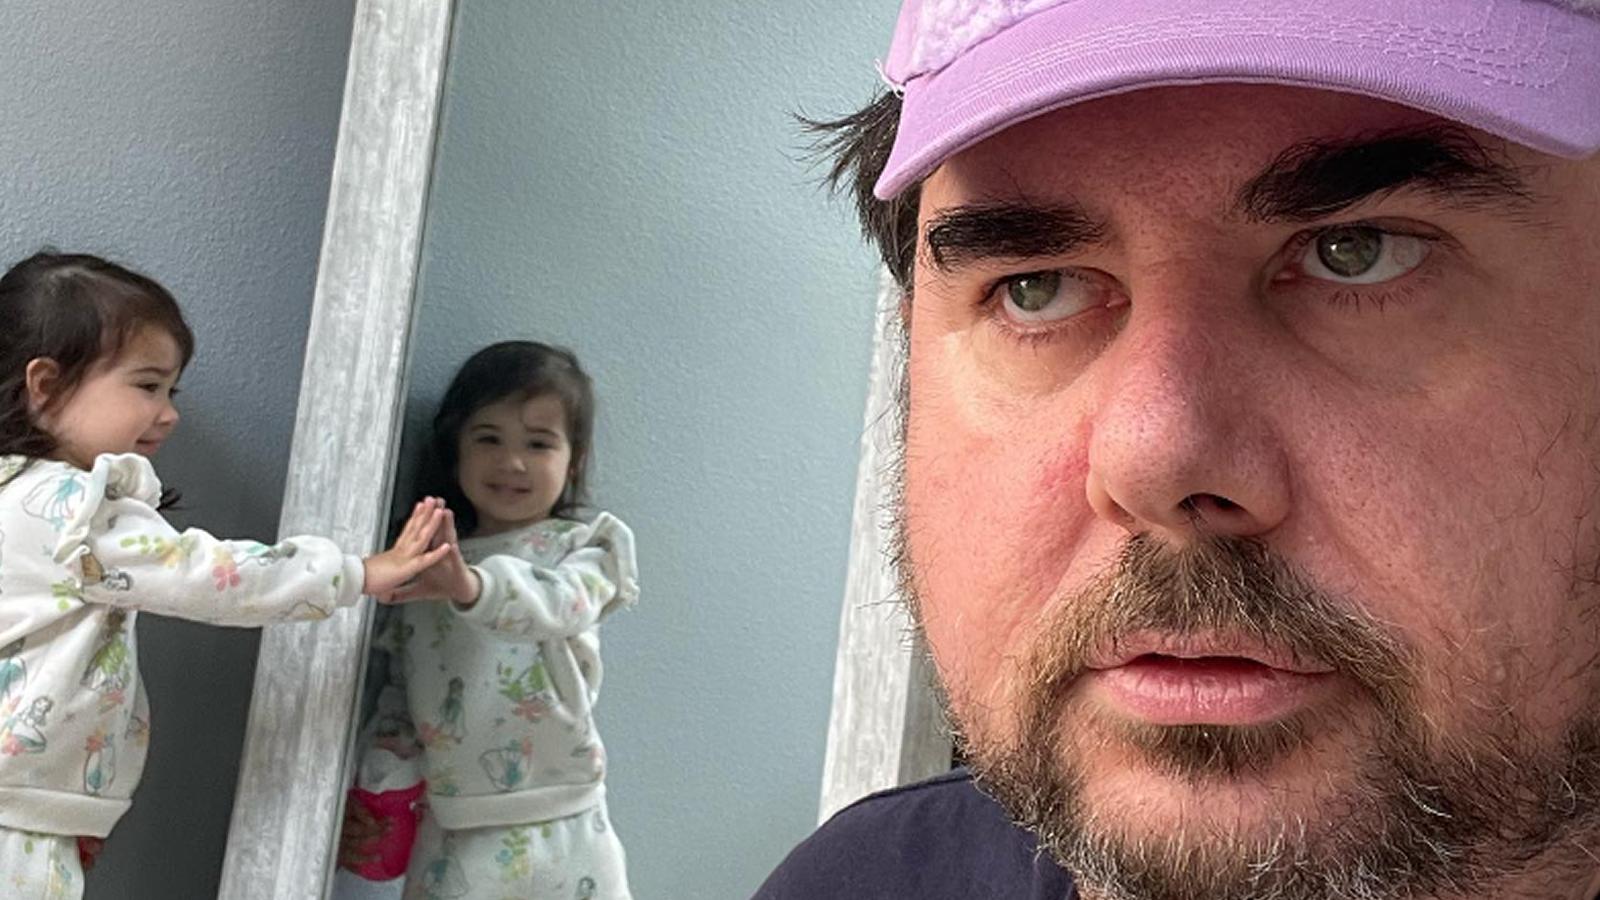 Jeff Gerstmann and his daughter